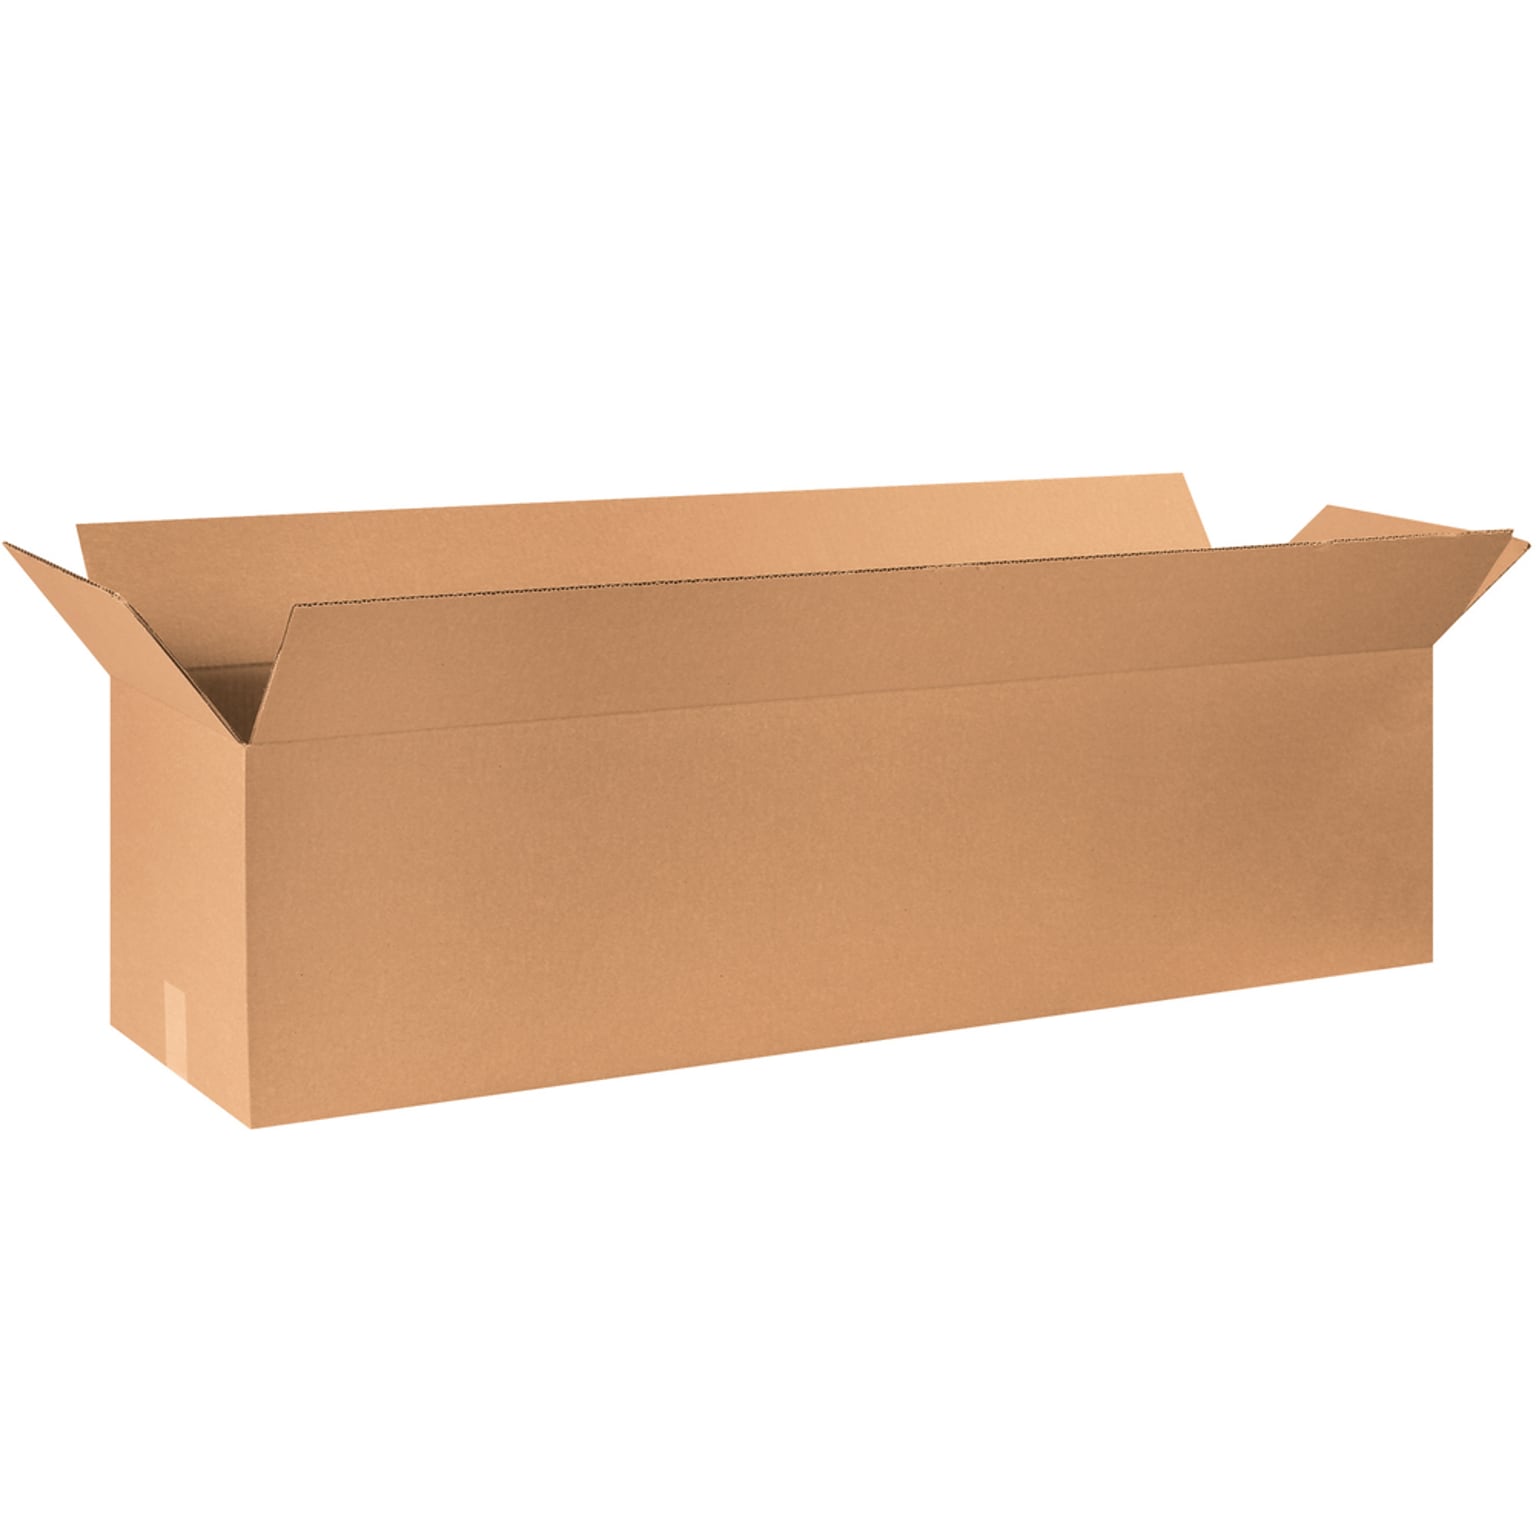 SI Products 48 x 12 x 12 Corrugated Shipping Boxes, 200#/ECT-32 Mullen Rated Corrugated, Pack of 10, (481212)